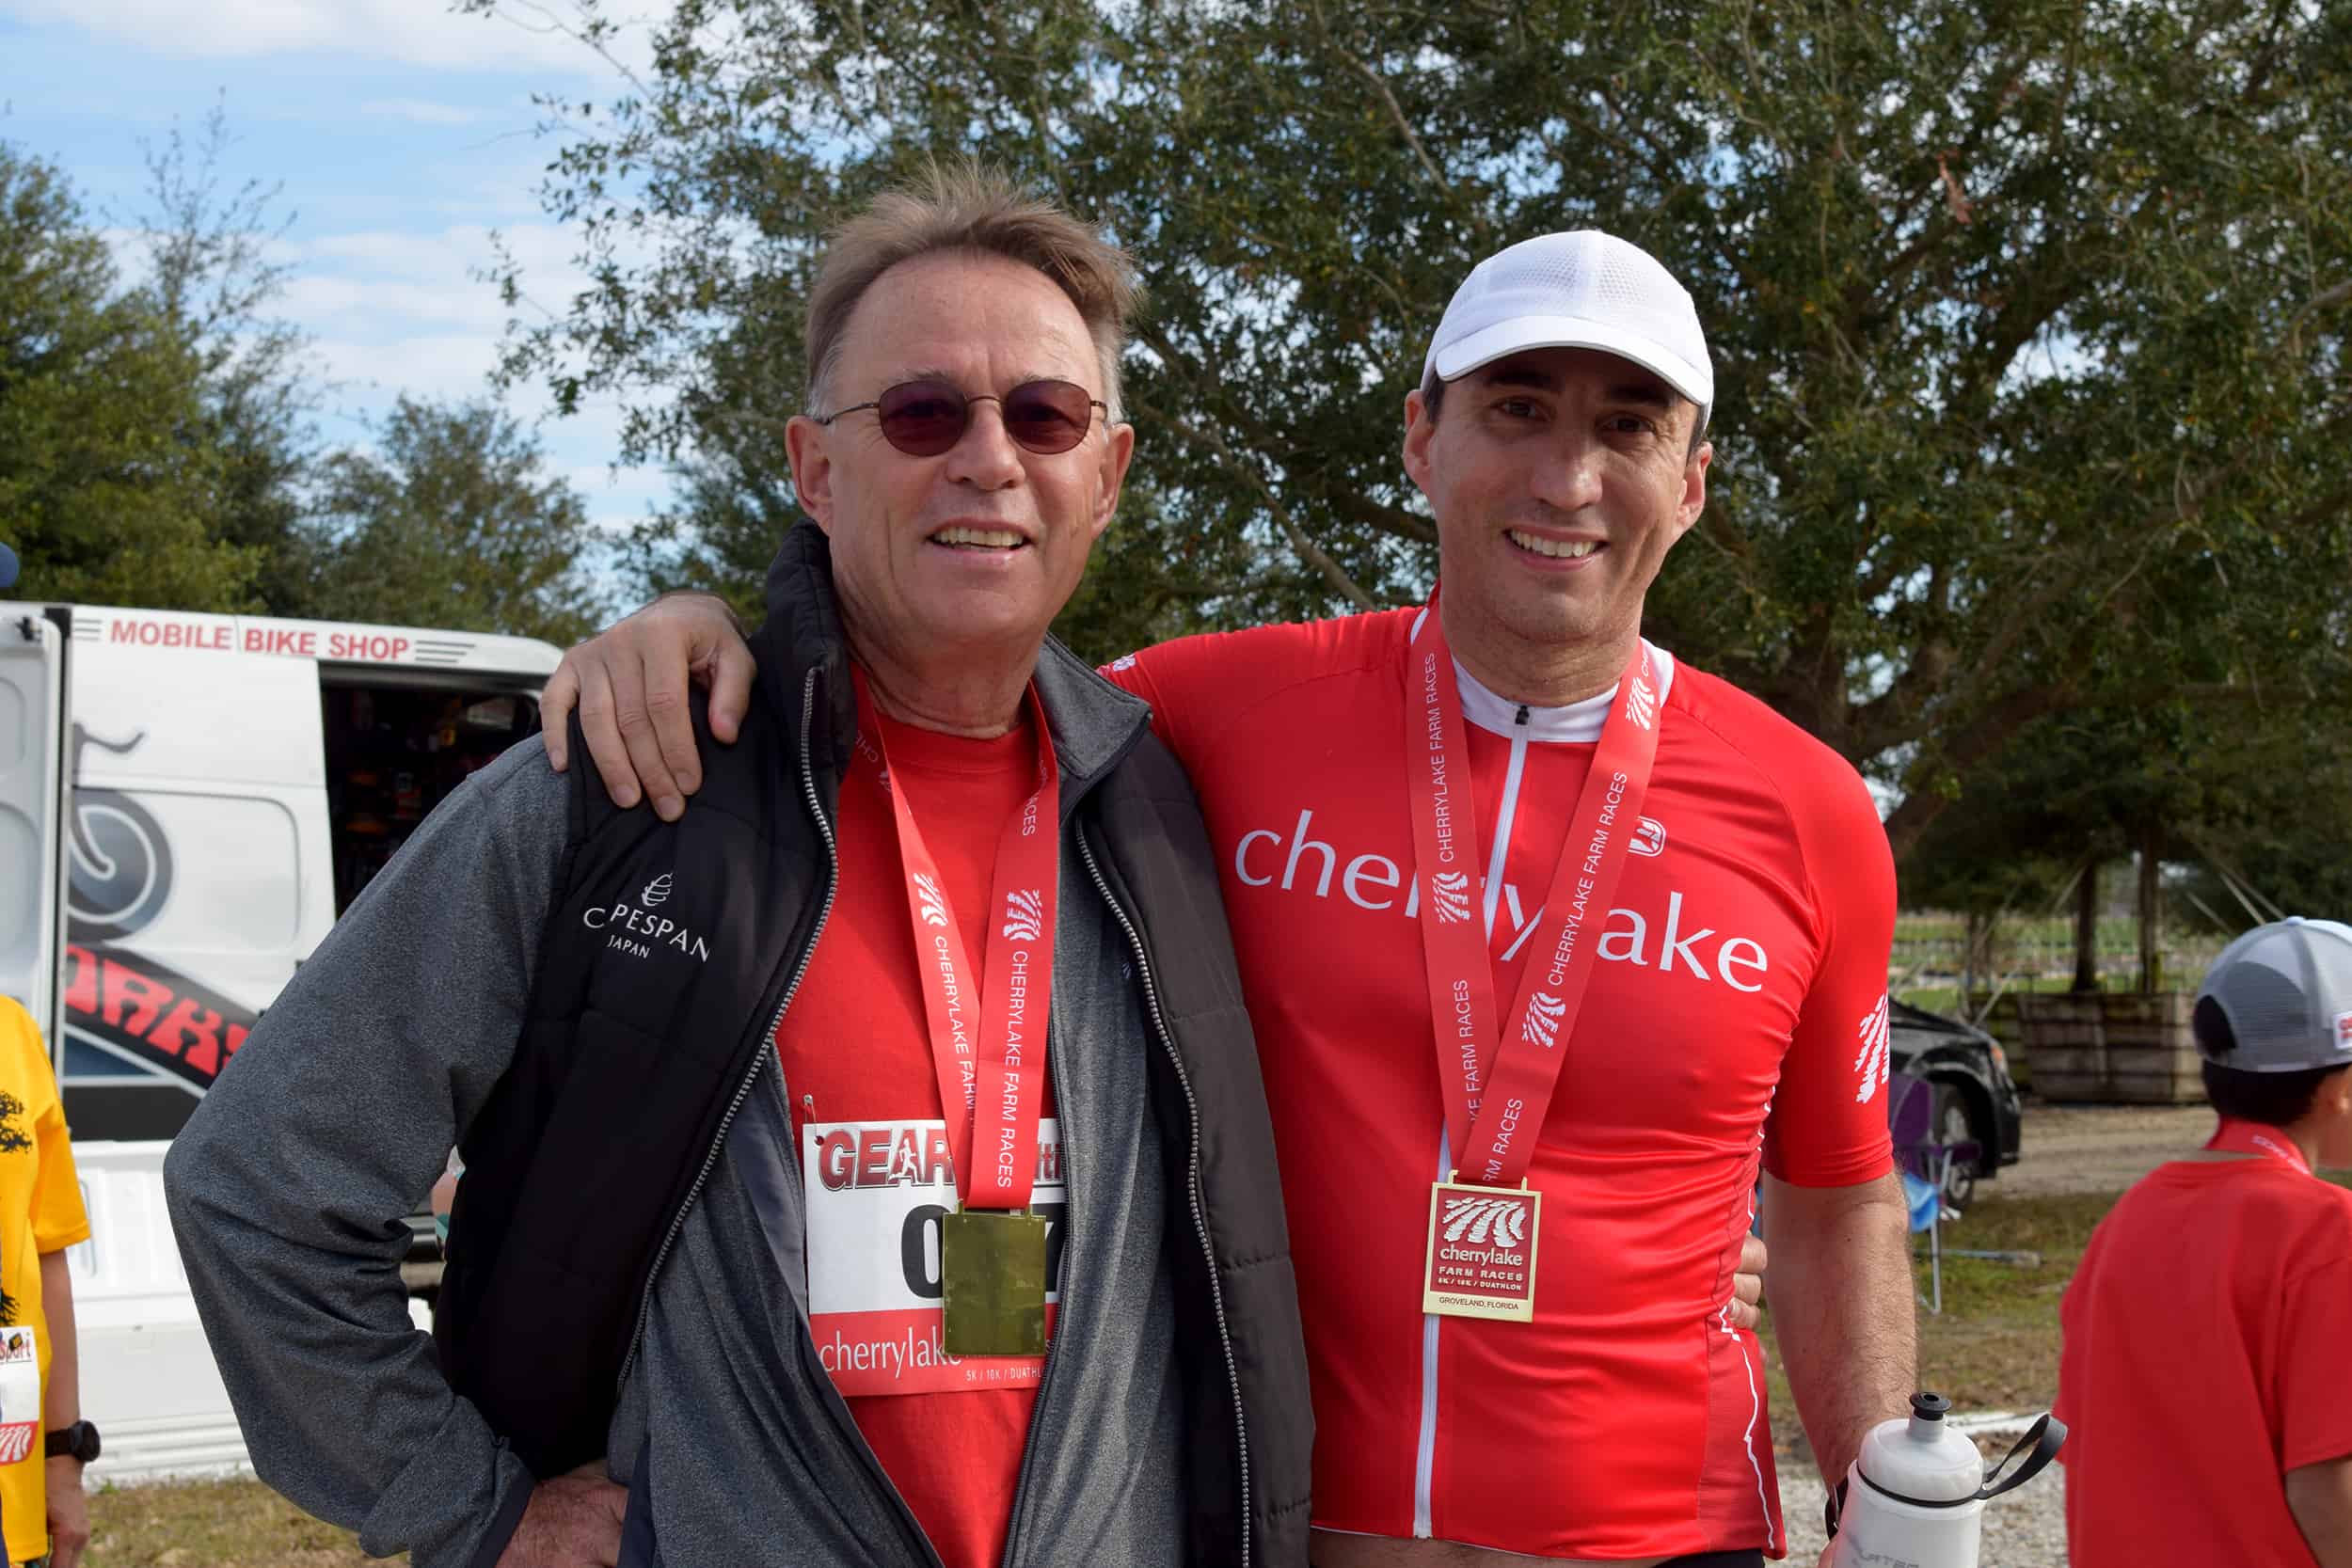 Cherrylake Founder, Michel Sallin, and Son, Timothee Sallin, smile after a race.